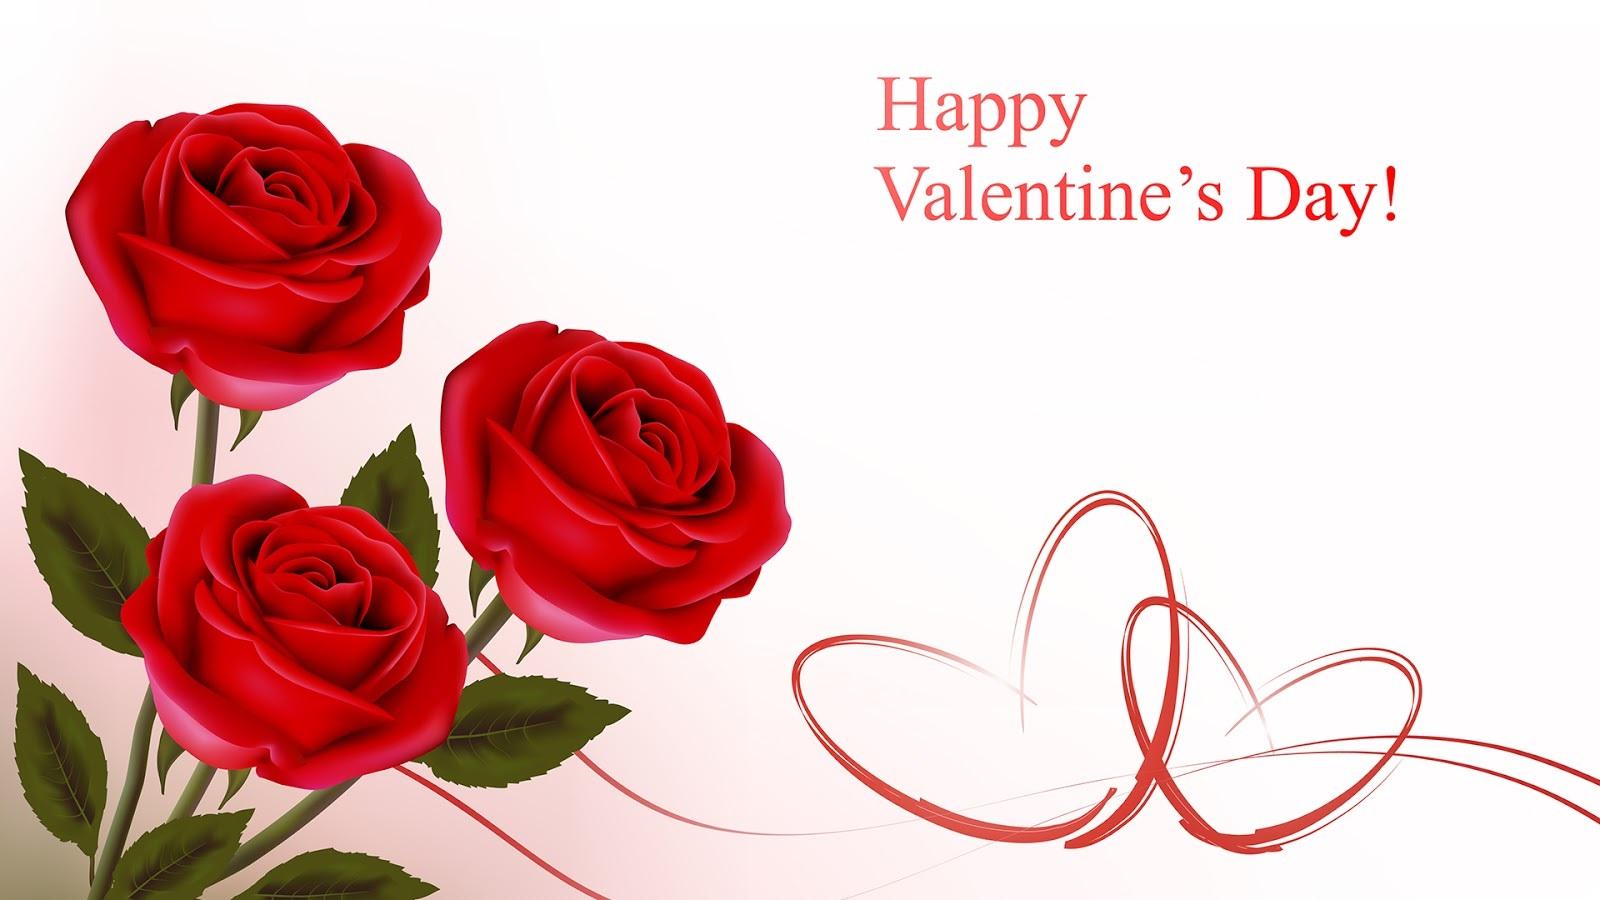 Free Valentine S Day Image, Download Free Clip Art, Free